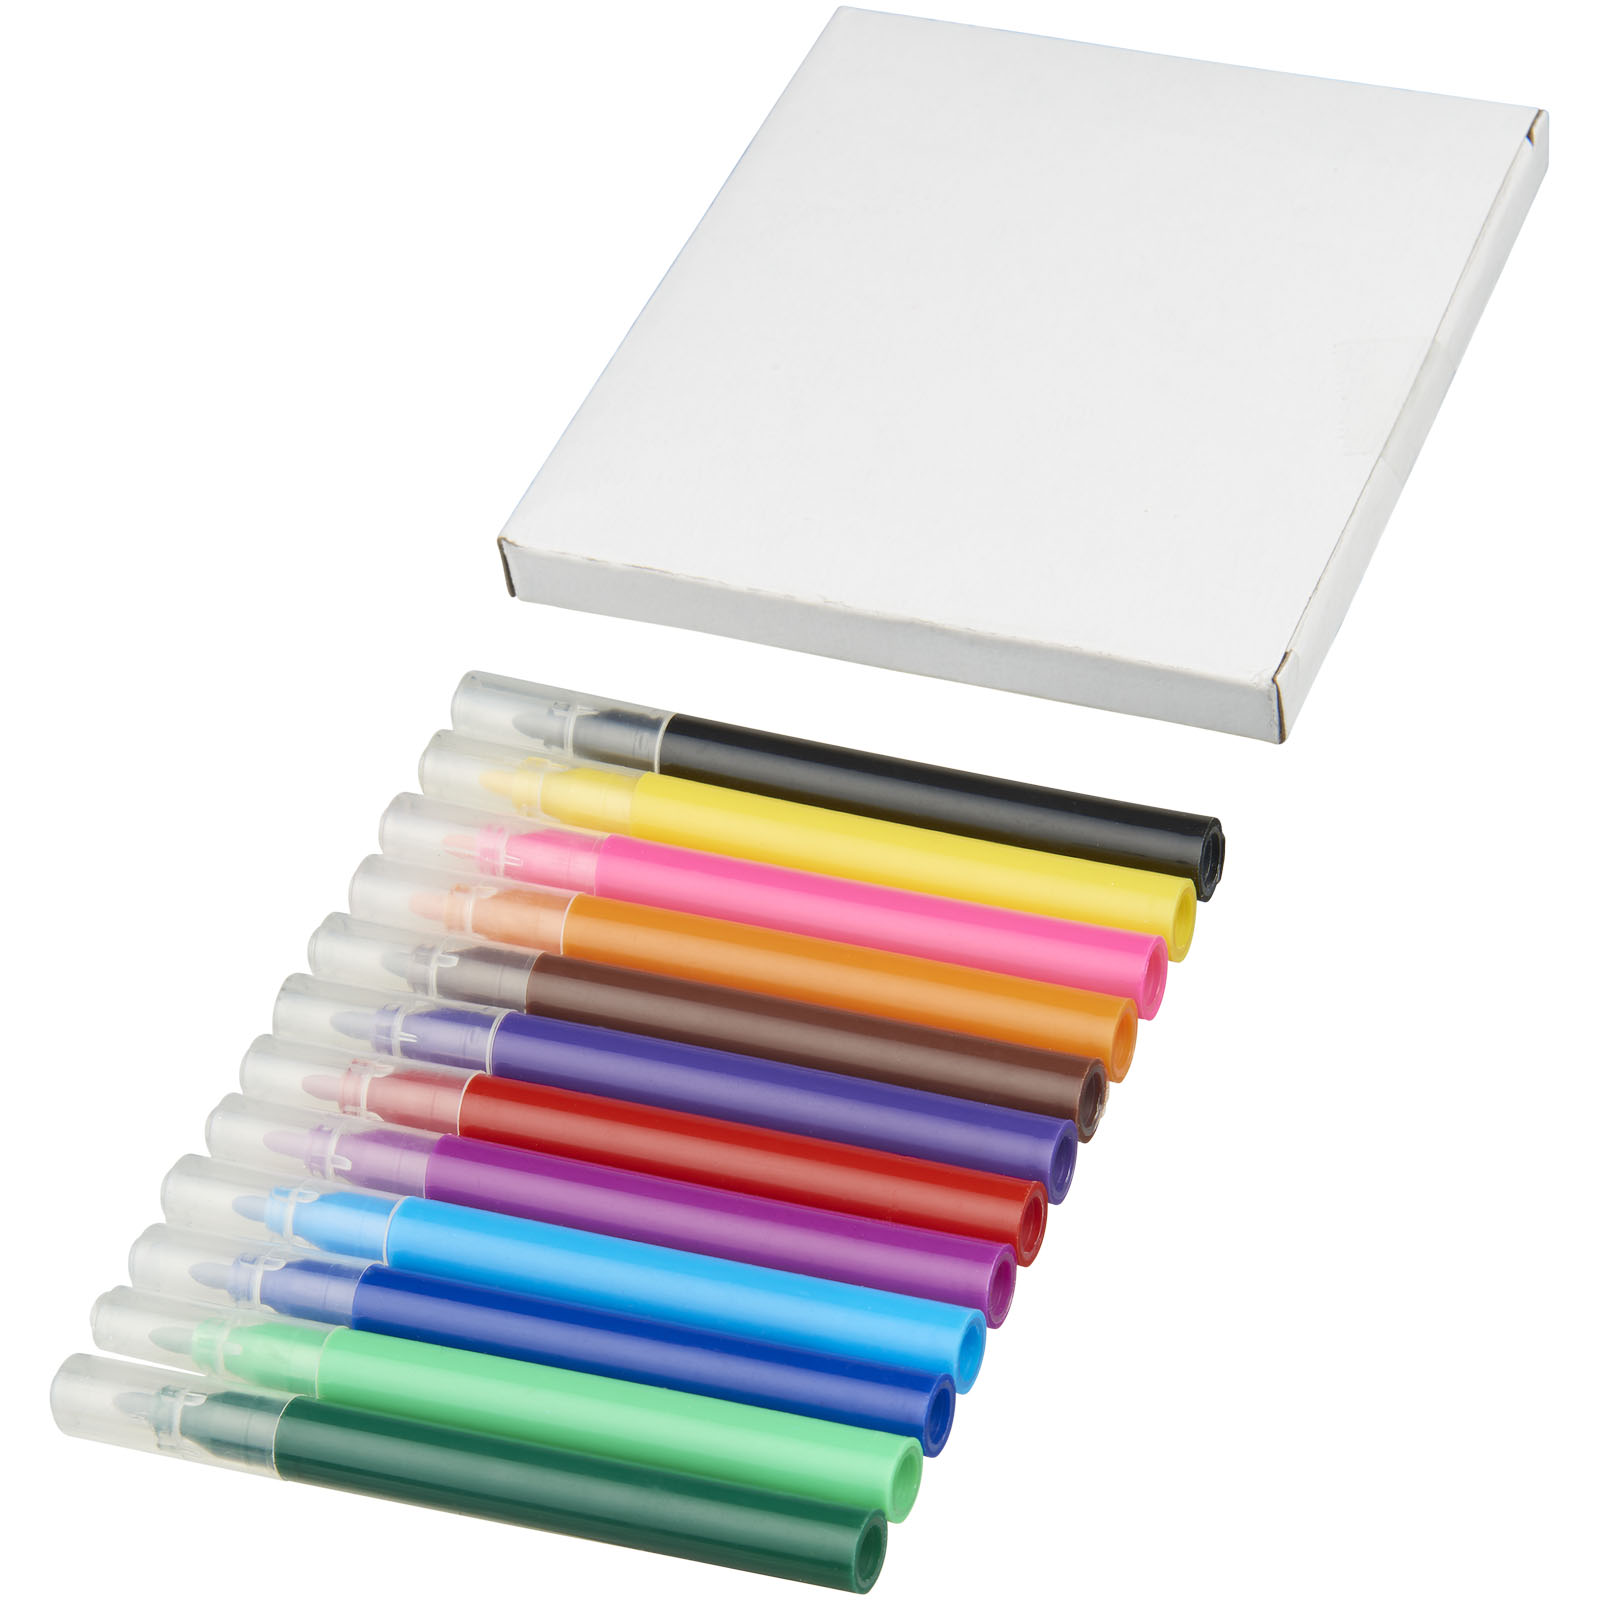 Set of Colored Markers in a Gift Box - Coppull